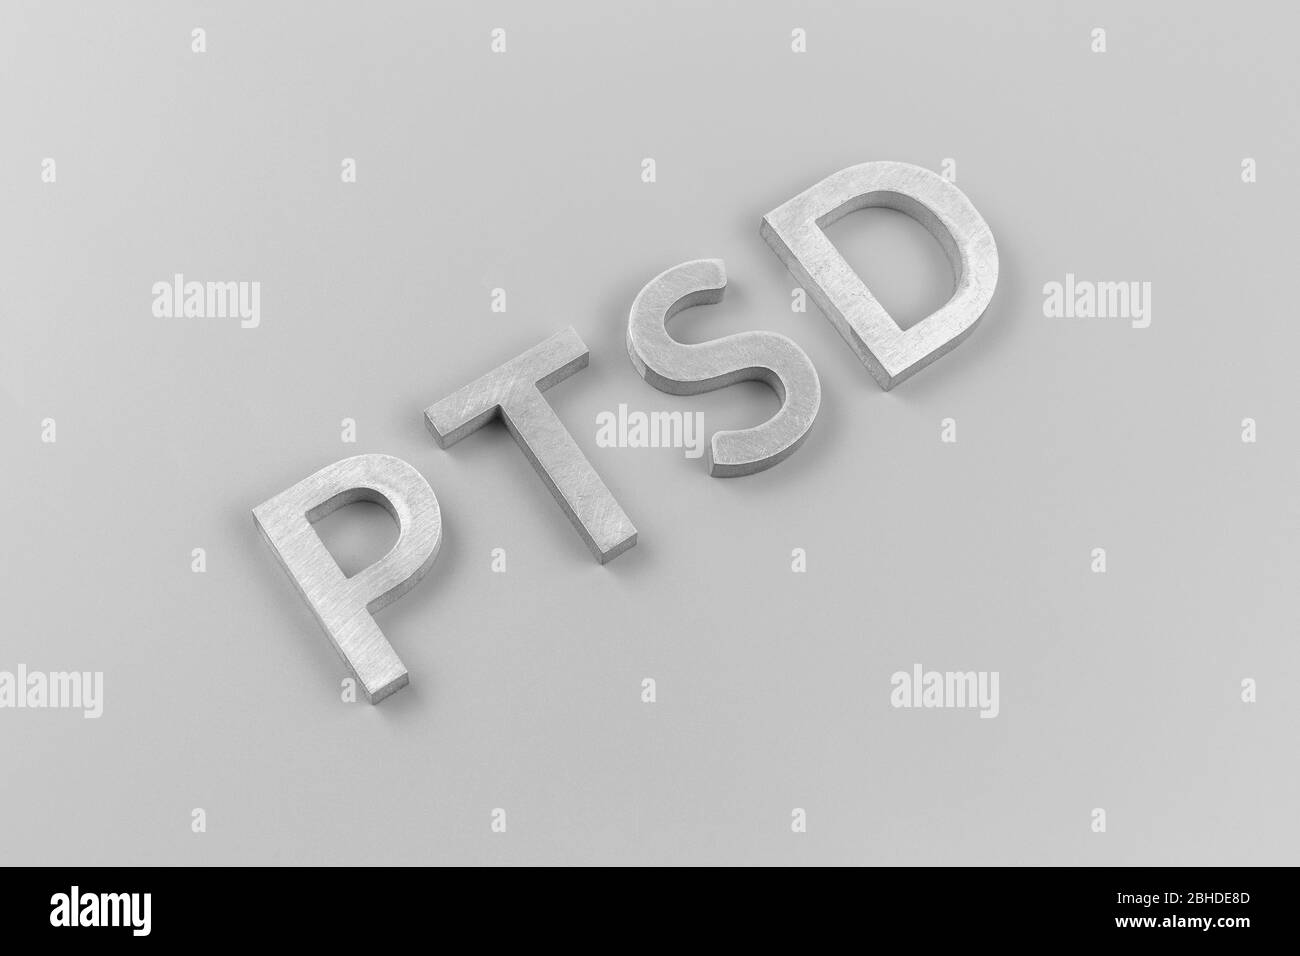 an abbreviation PTSD - post traumatic stress disorder - laid with silver metal letters on light gray flat surface Stock Photo